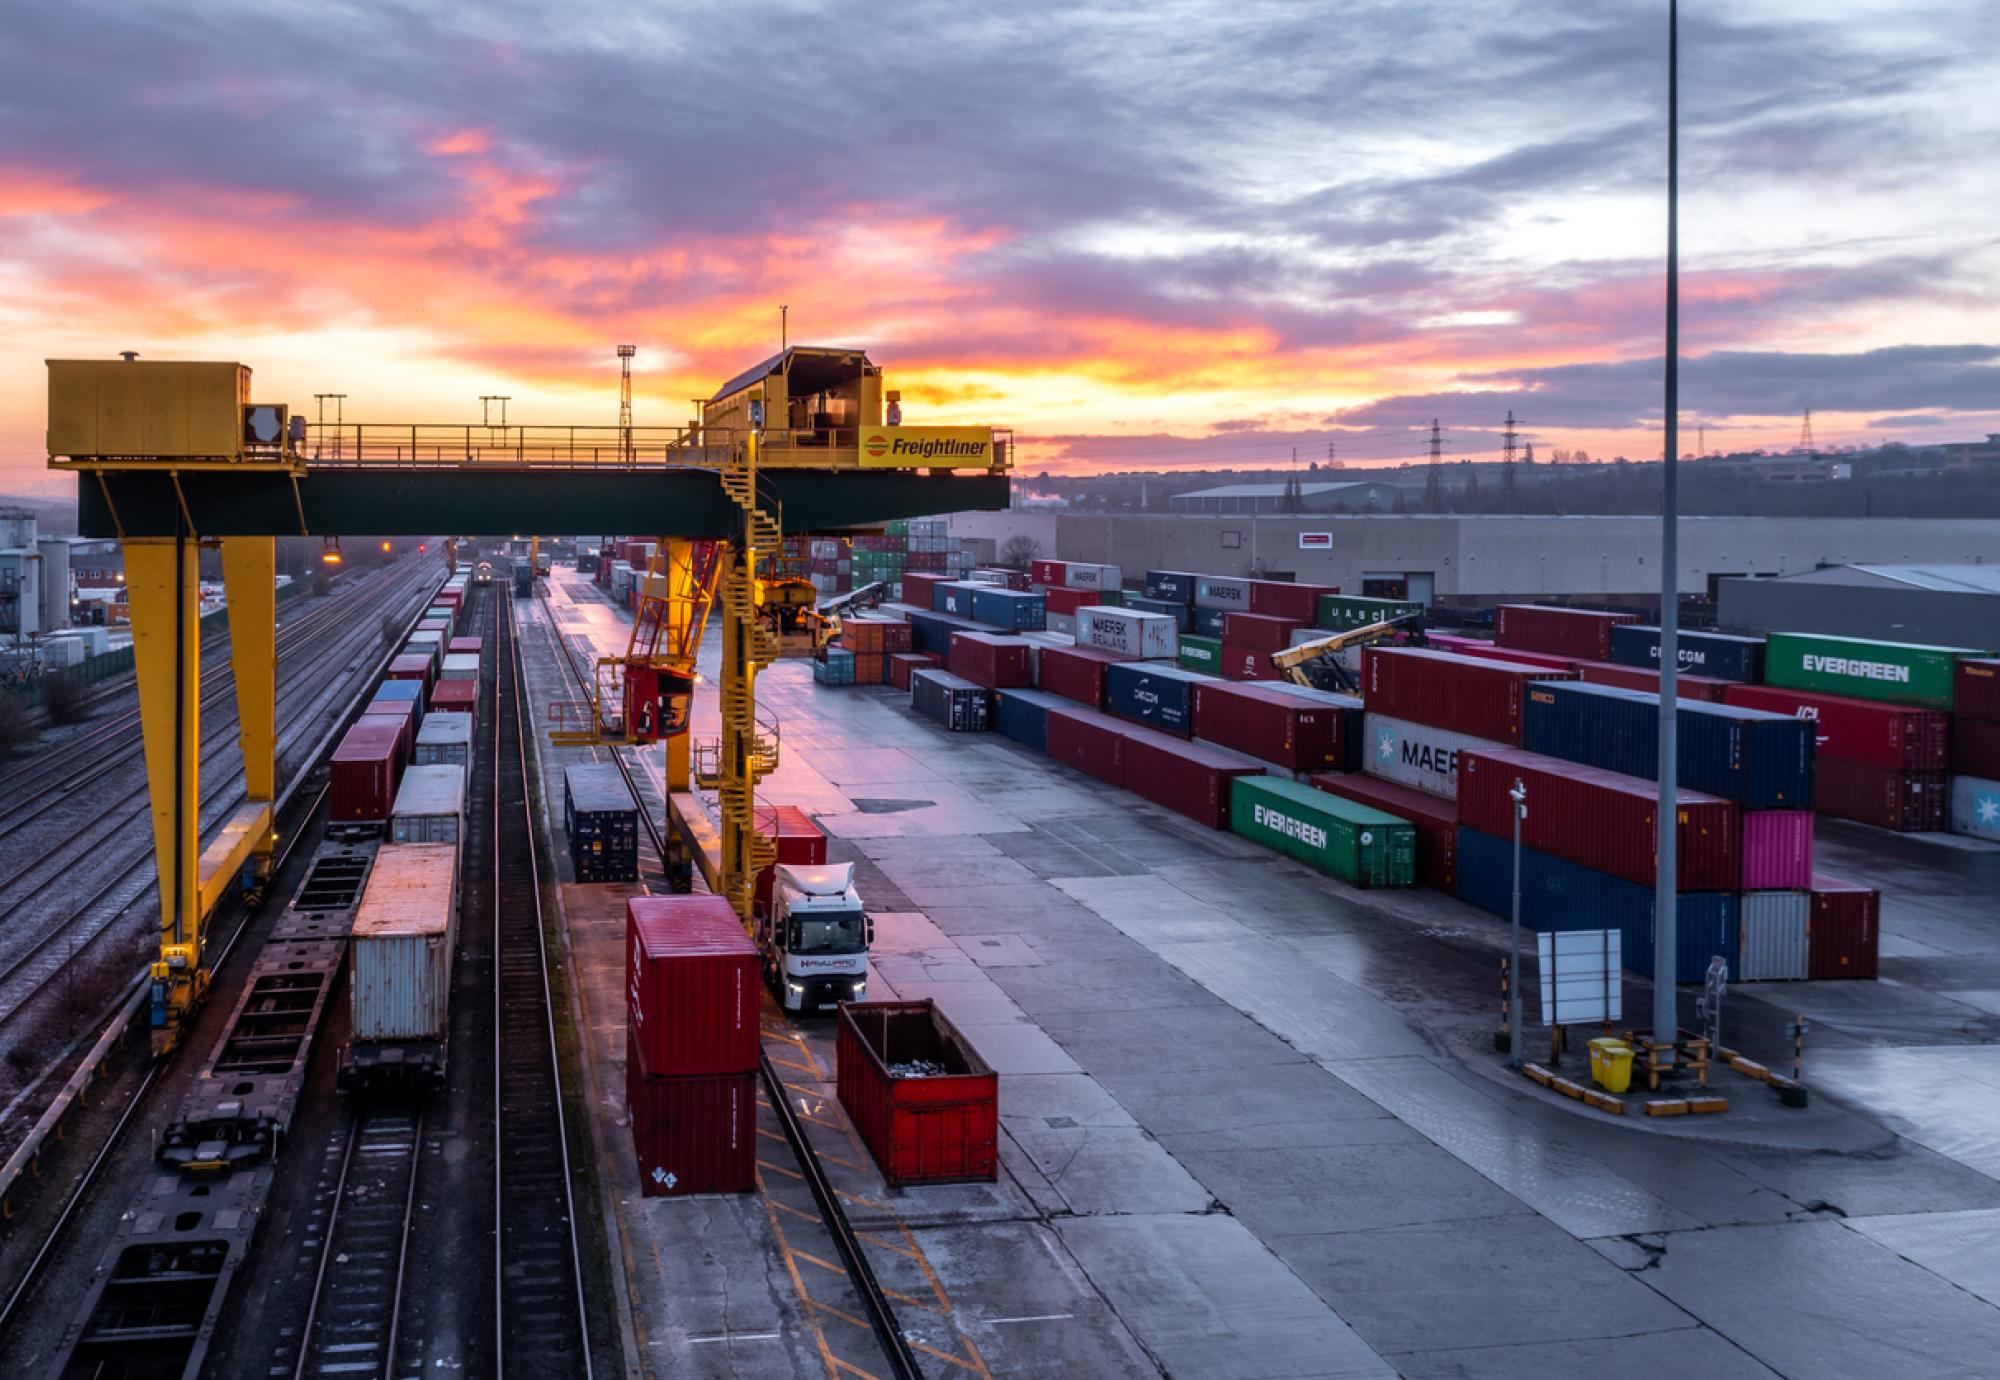 New report says increased demand at Felixstowe and Freeport East means increased freight capacity at Ely makes sense